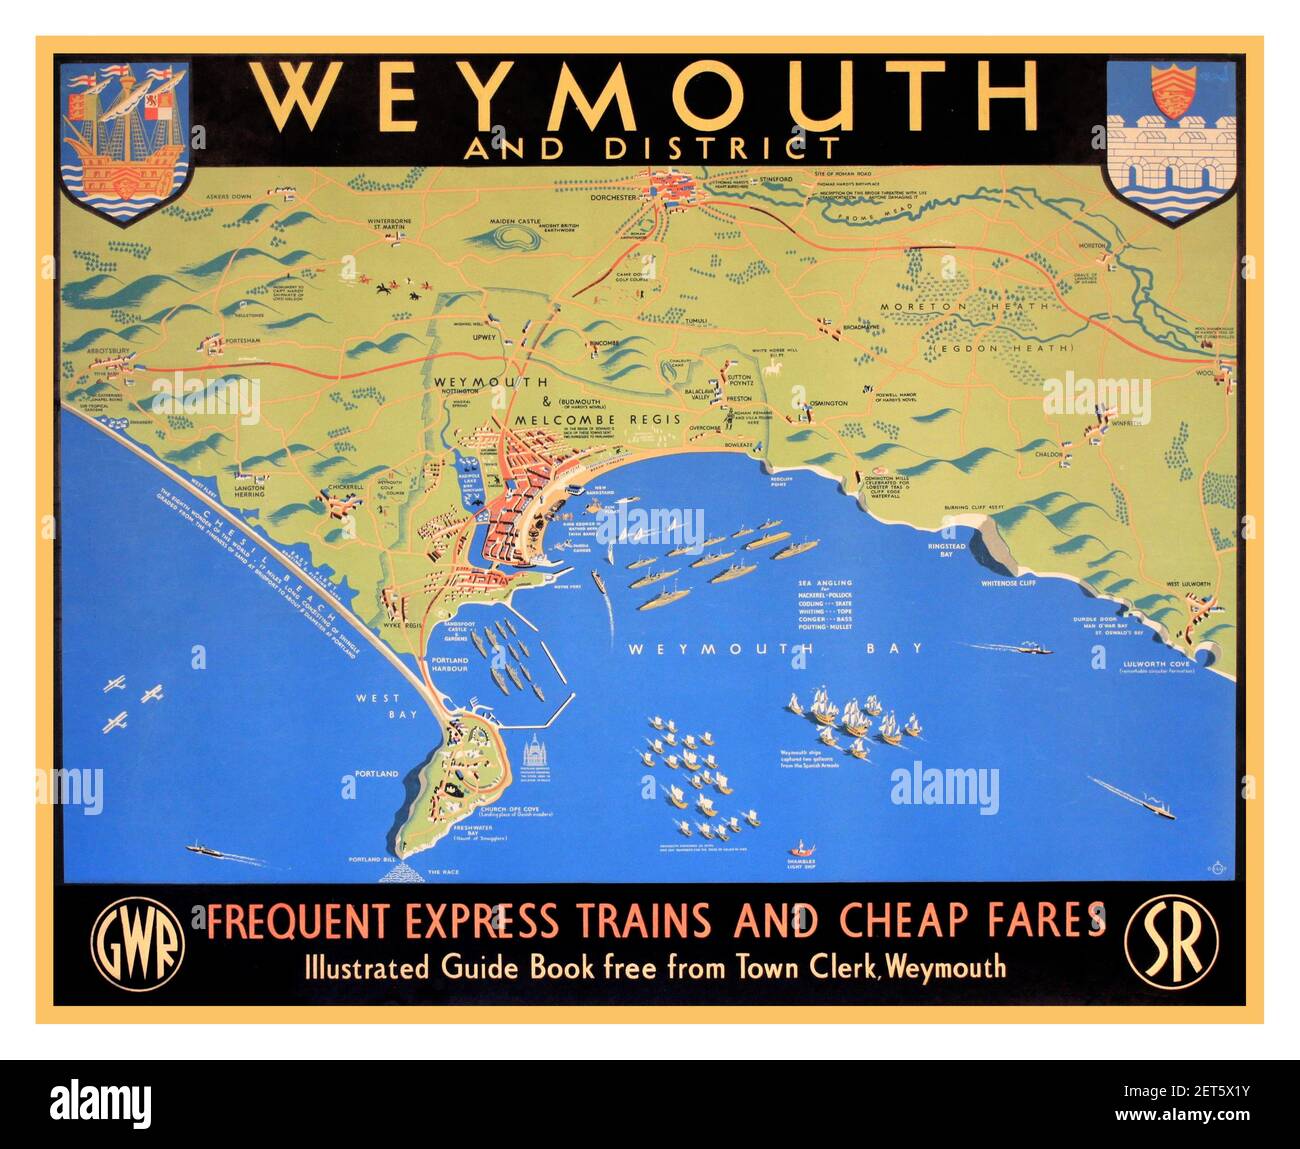 WEYMOUTH Vintage UK Travel Vacation Train Tour Poster Map Coastline 'Dilly’s  Weymouth and District, original poster printed for GWR and SR by Baynard 1947 Stock Photo